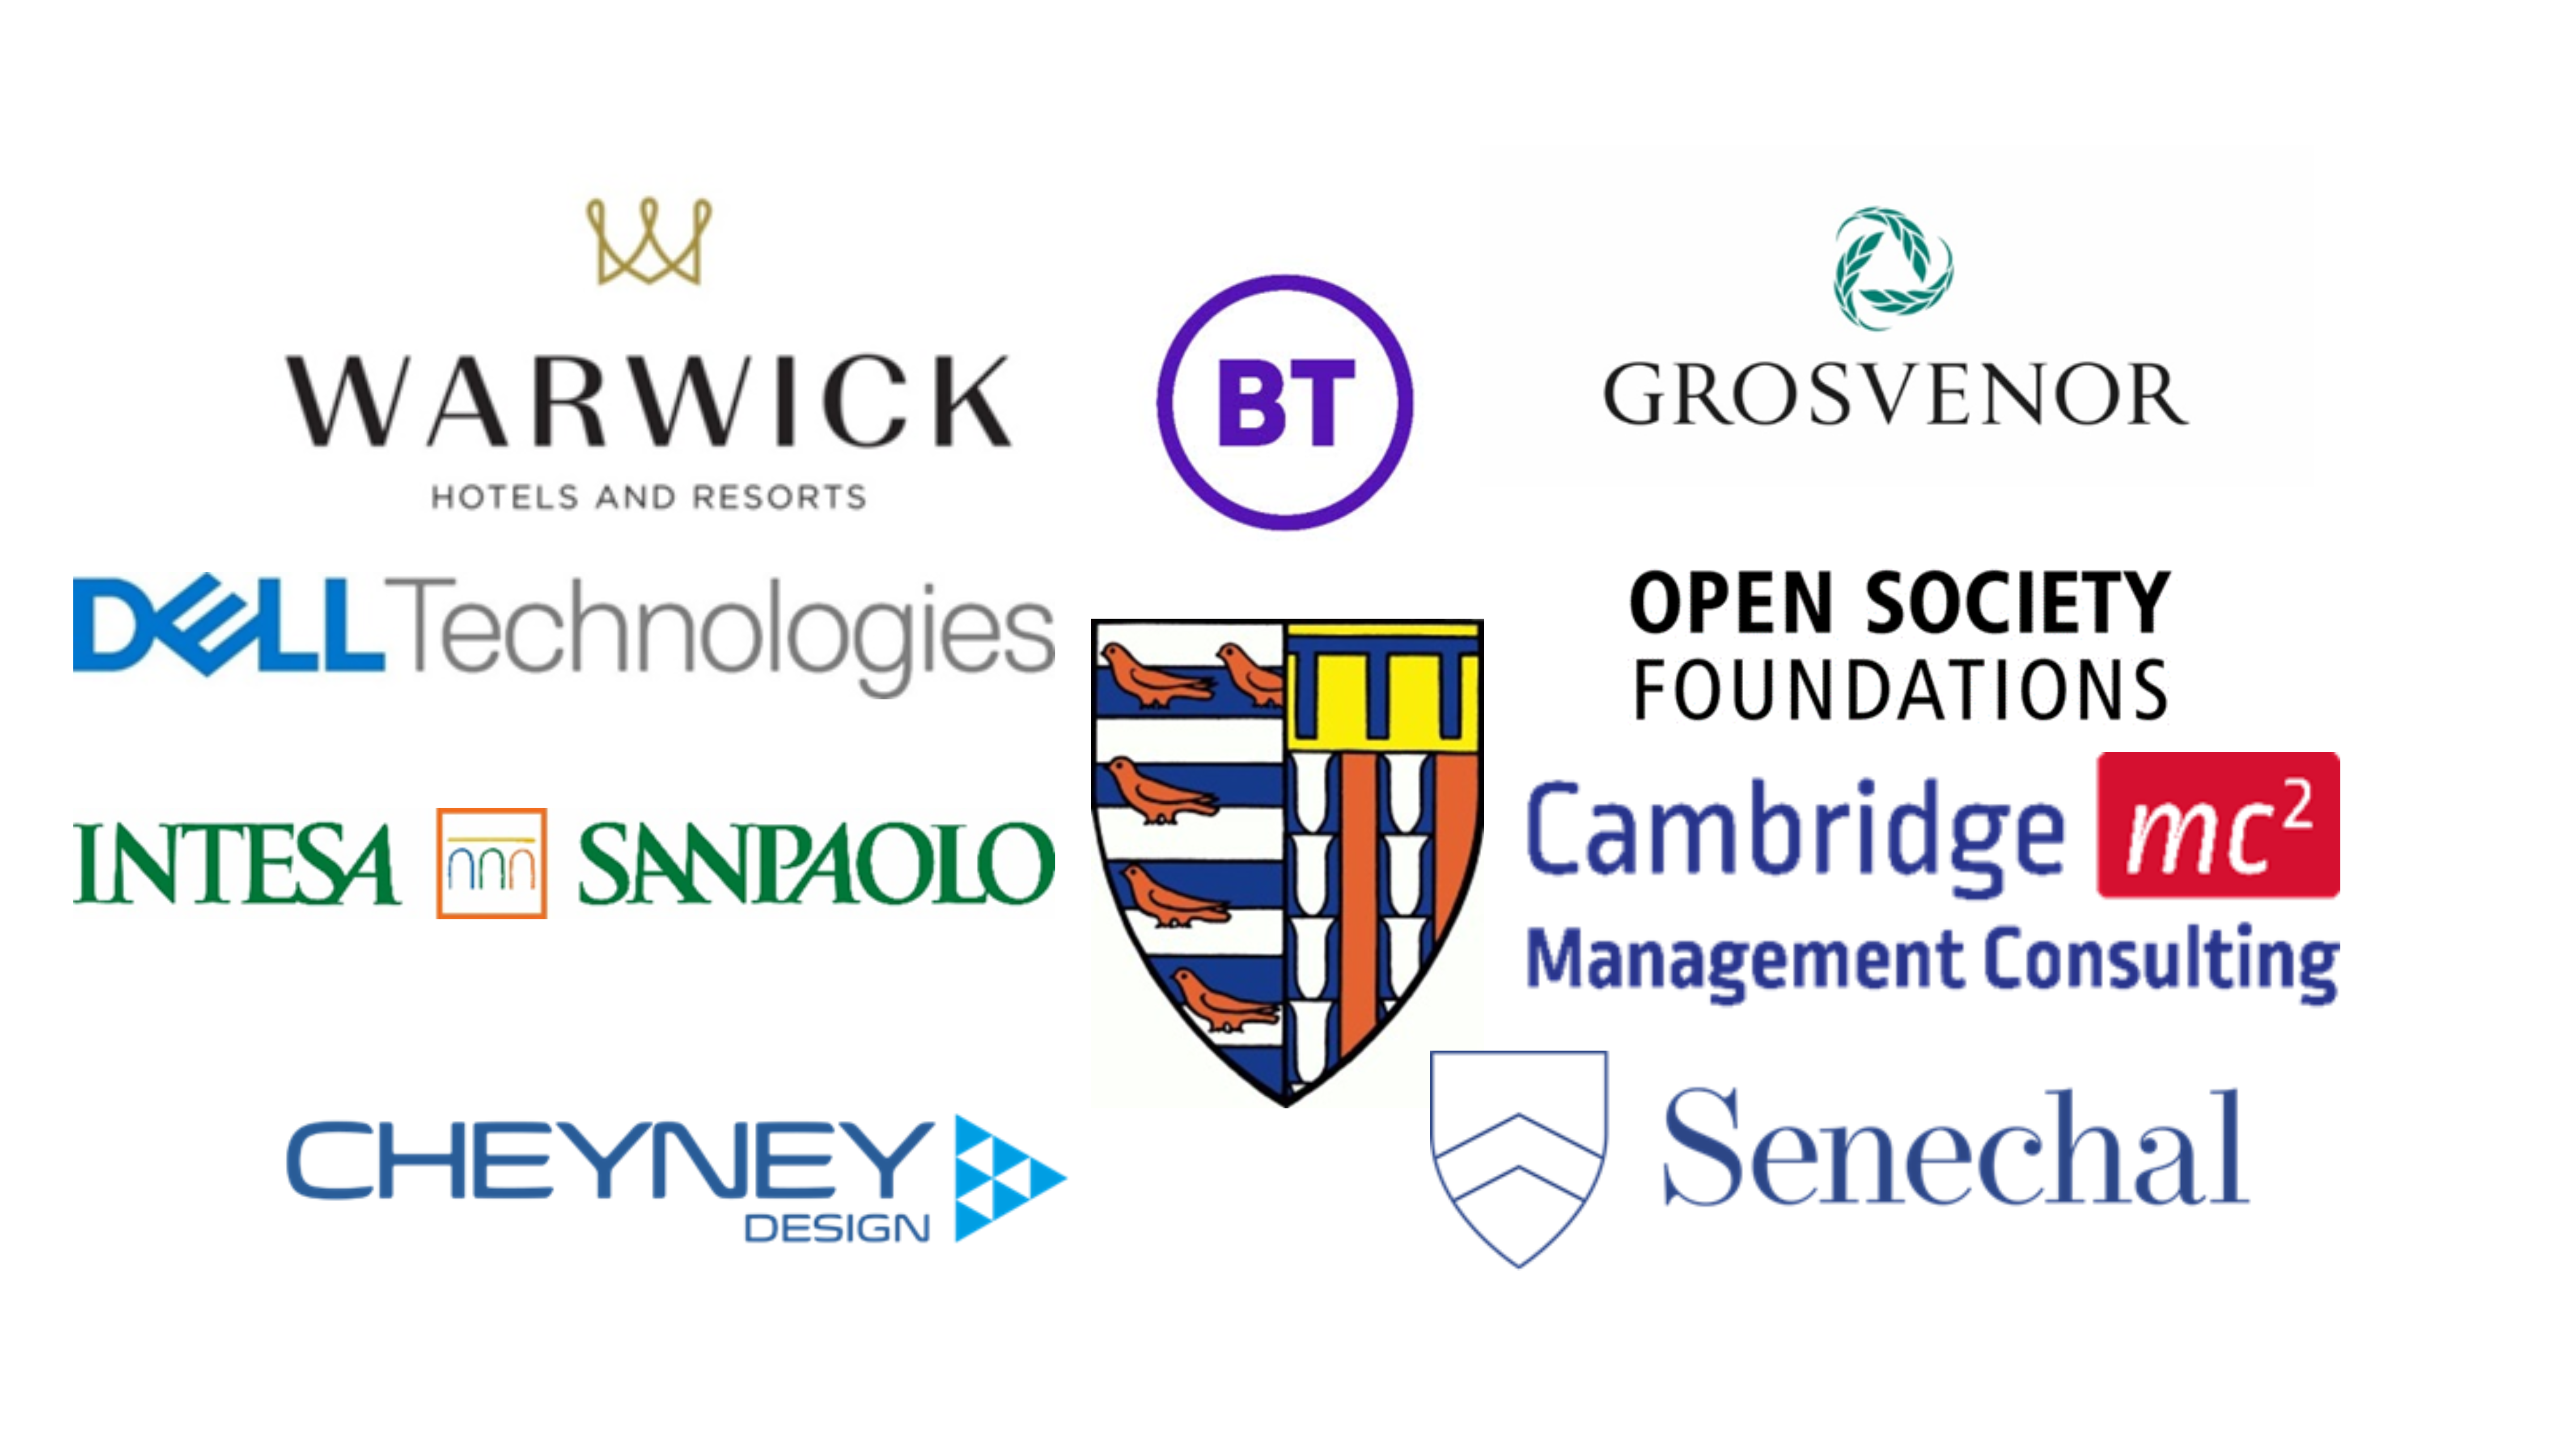 Members of the Corporate Partnership Programme include Warwick, Dell, Intesa Sanpaolo, Cheyney, BT, Grosvenor, Open Society Foundations, Cambridge Management Consulting, Senechal and Fund Executives